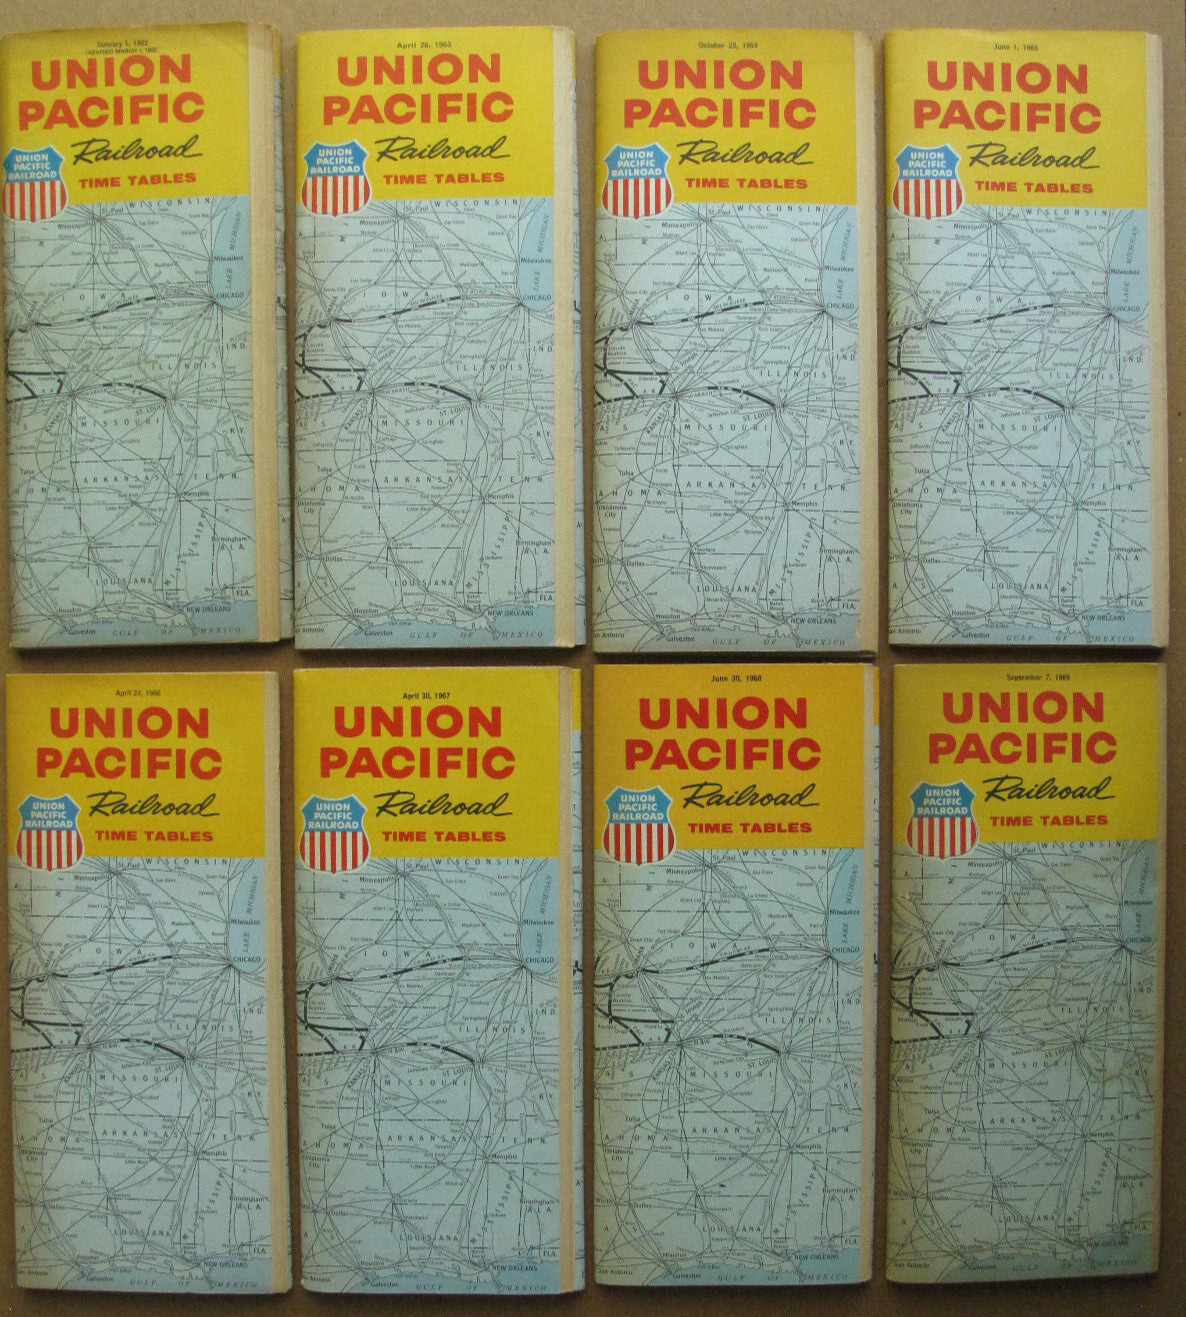 UP UNION PACIFIC 1960s Timetable Lot #1: 8 issues, 1962-69  **CLEARANCE**